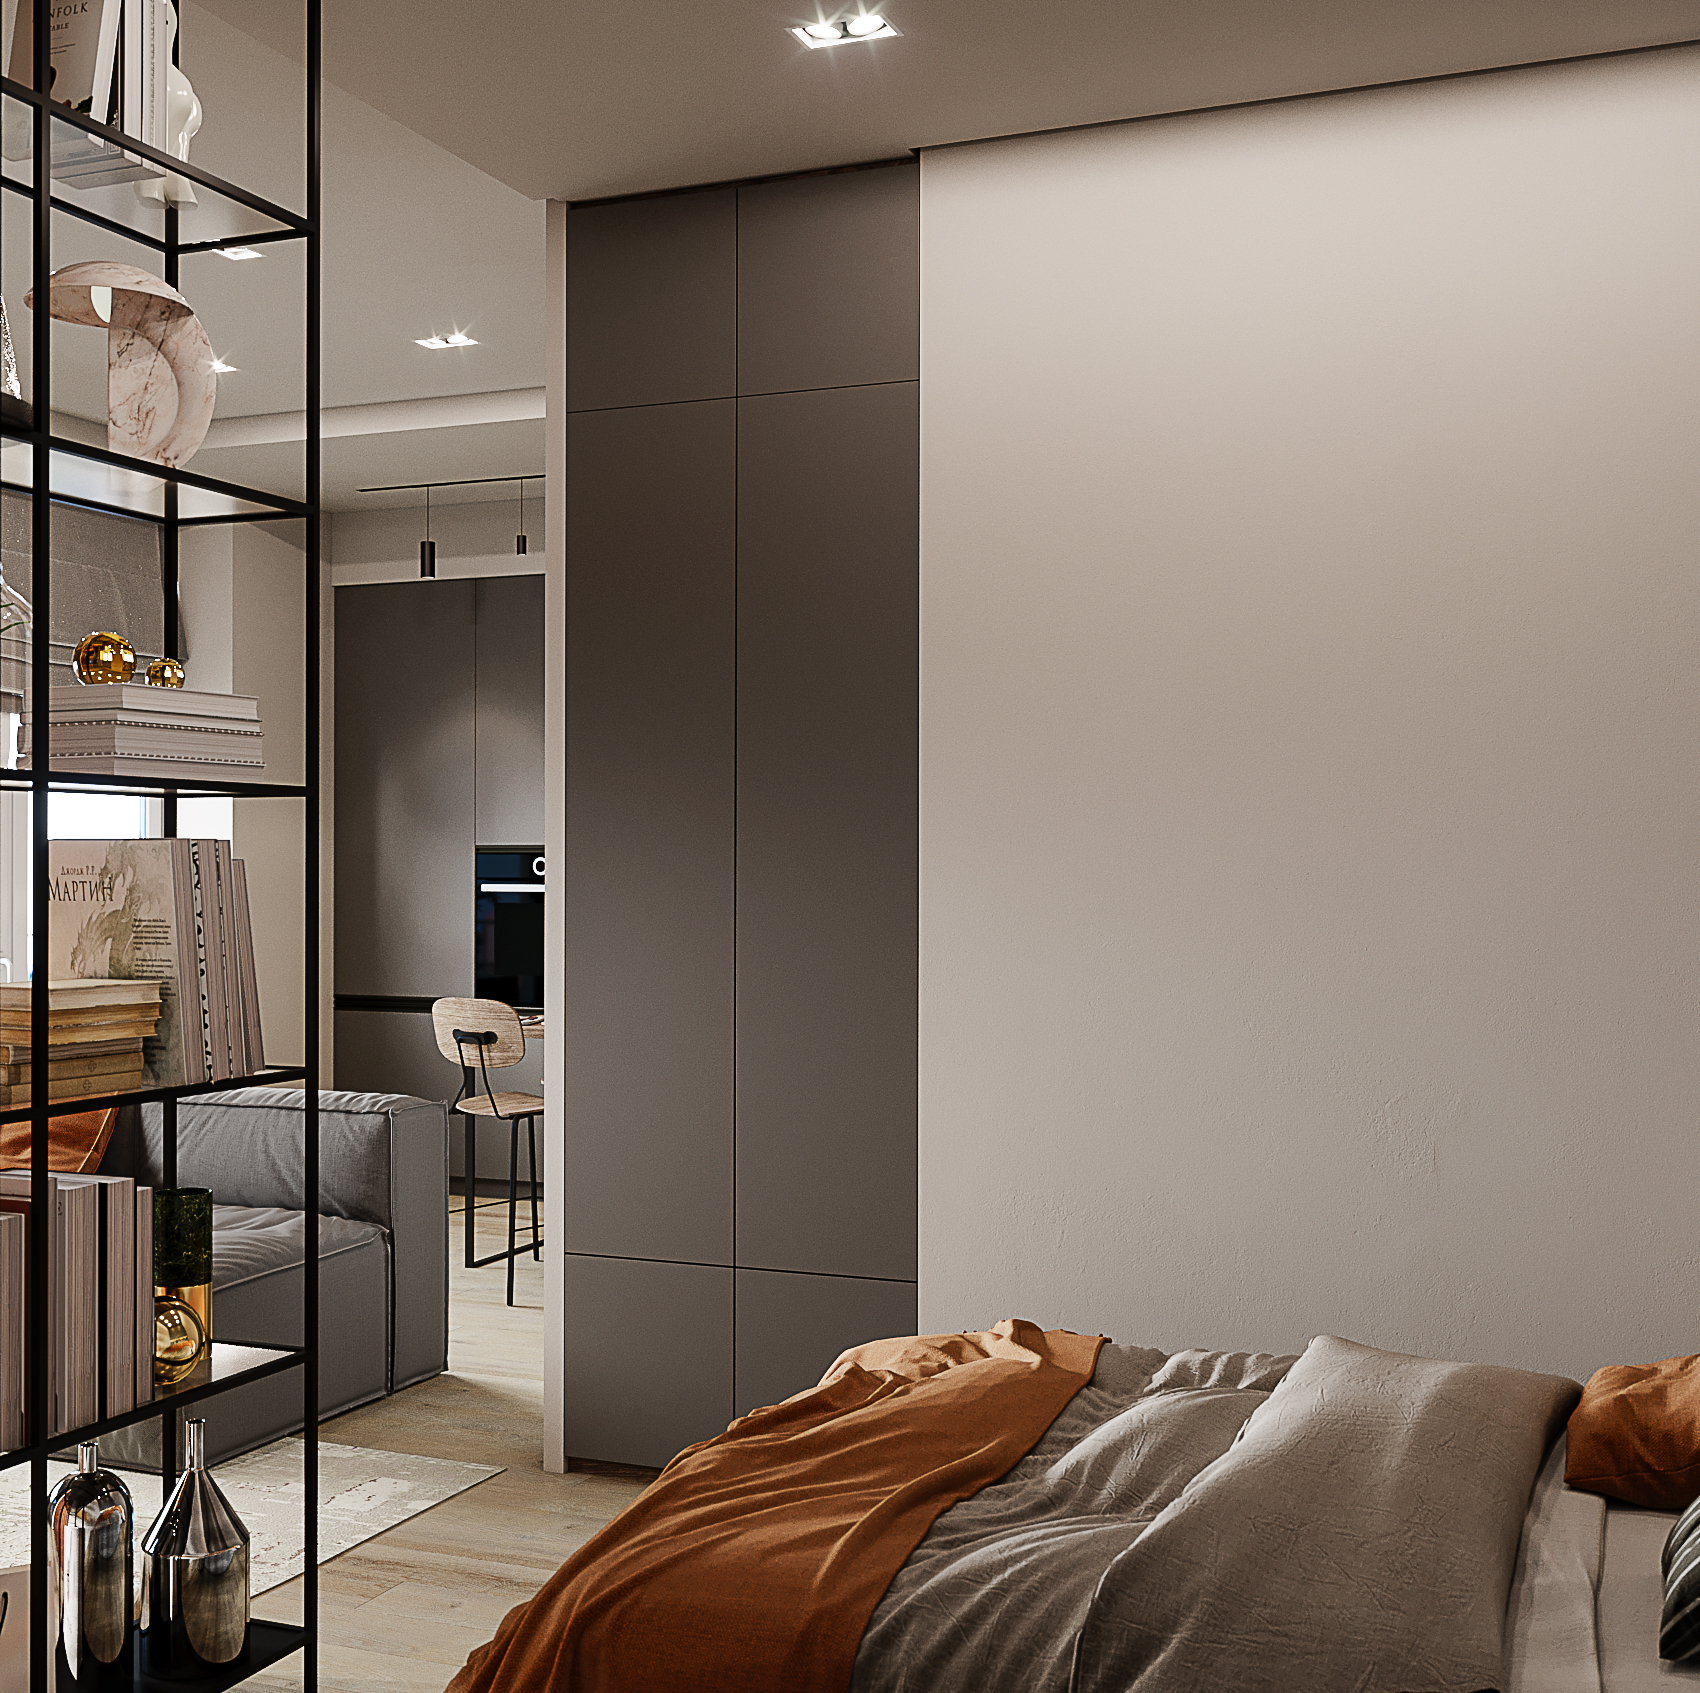 Studio design visualization for a young couple in 3d max corona render image